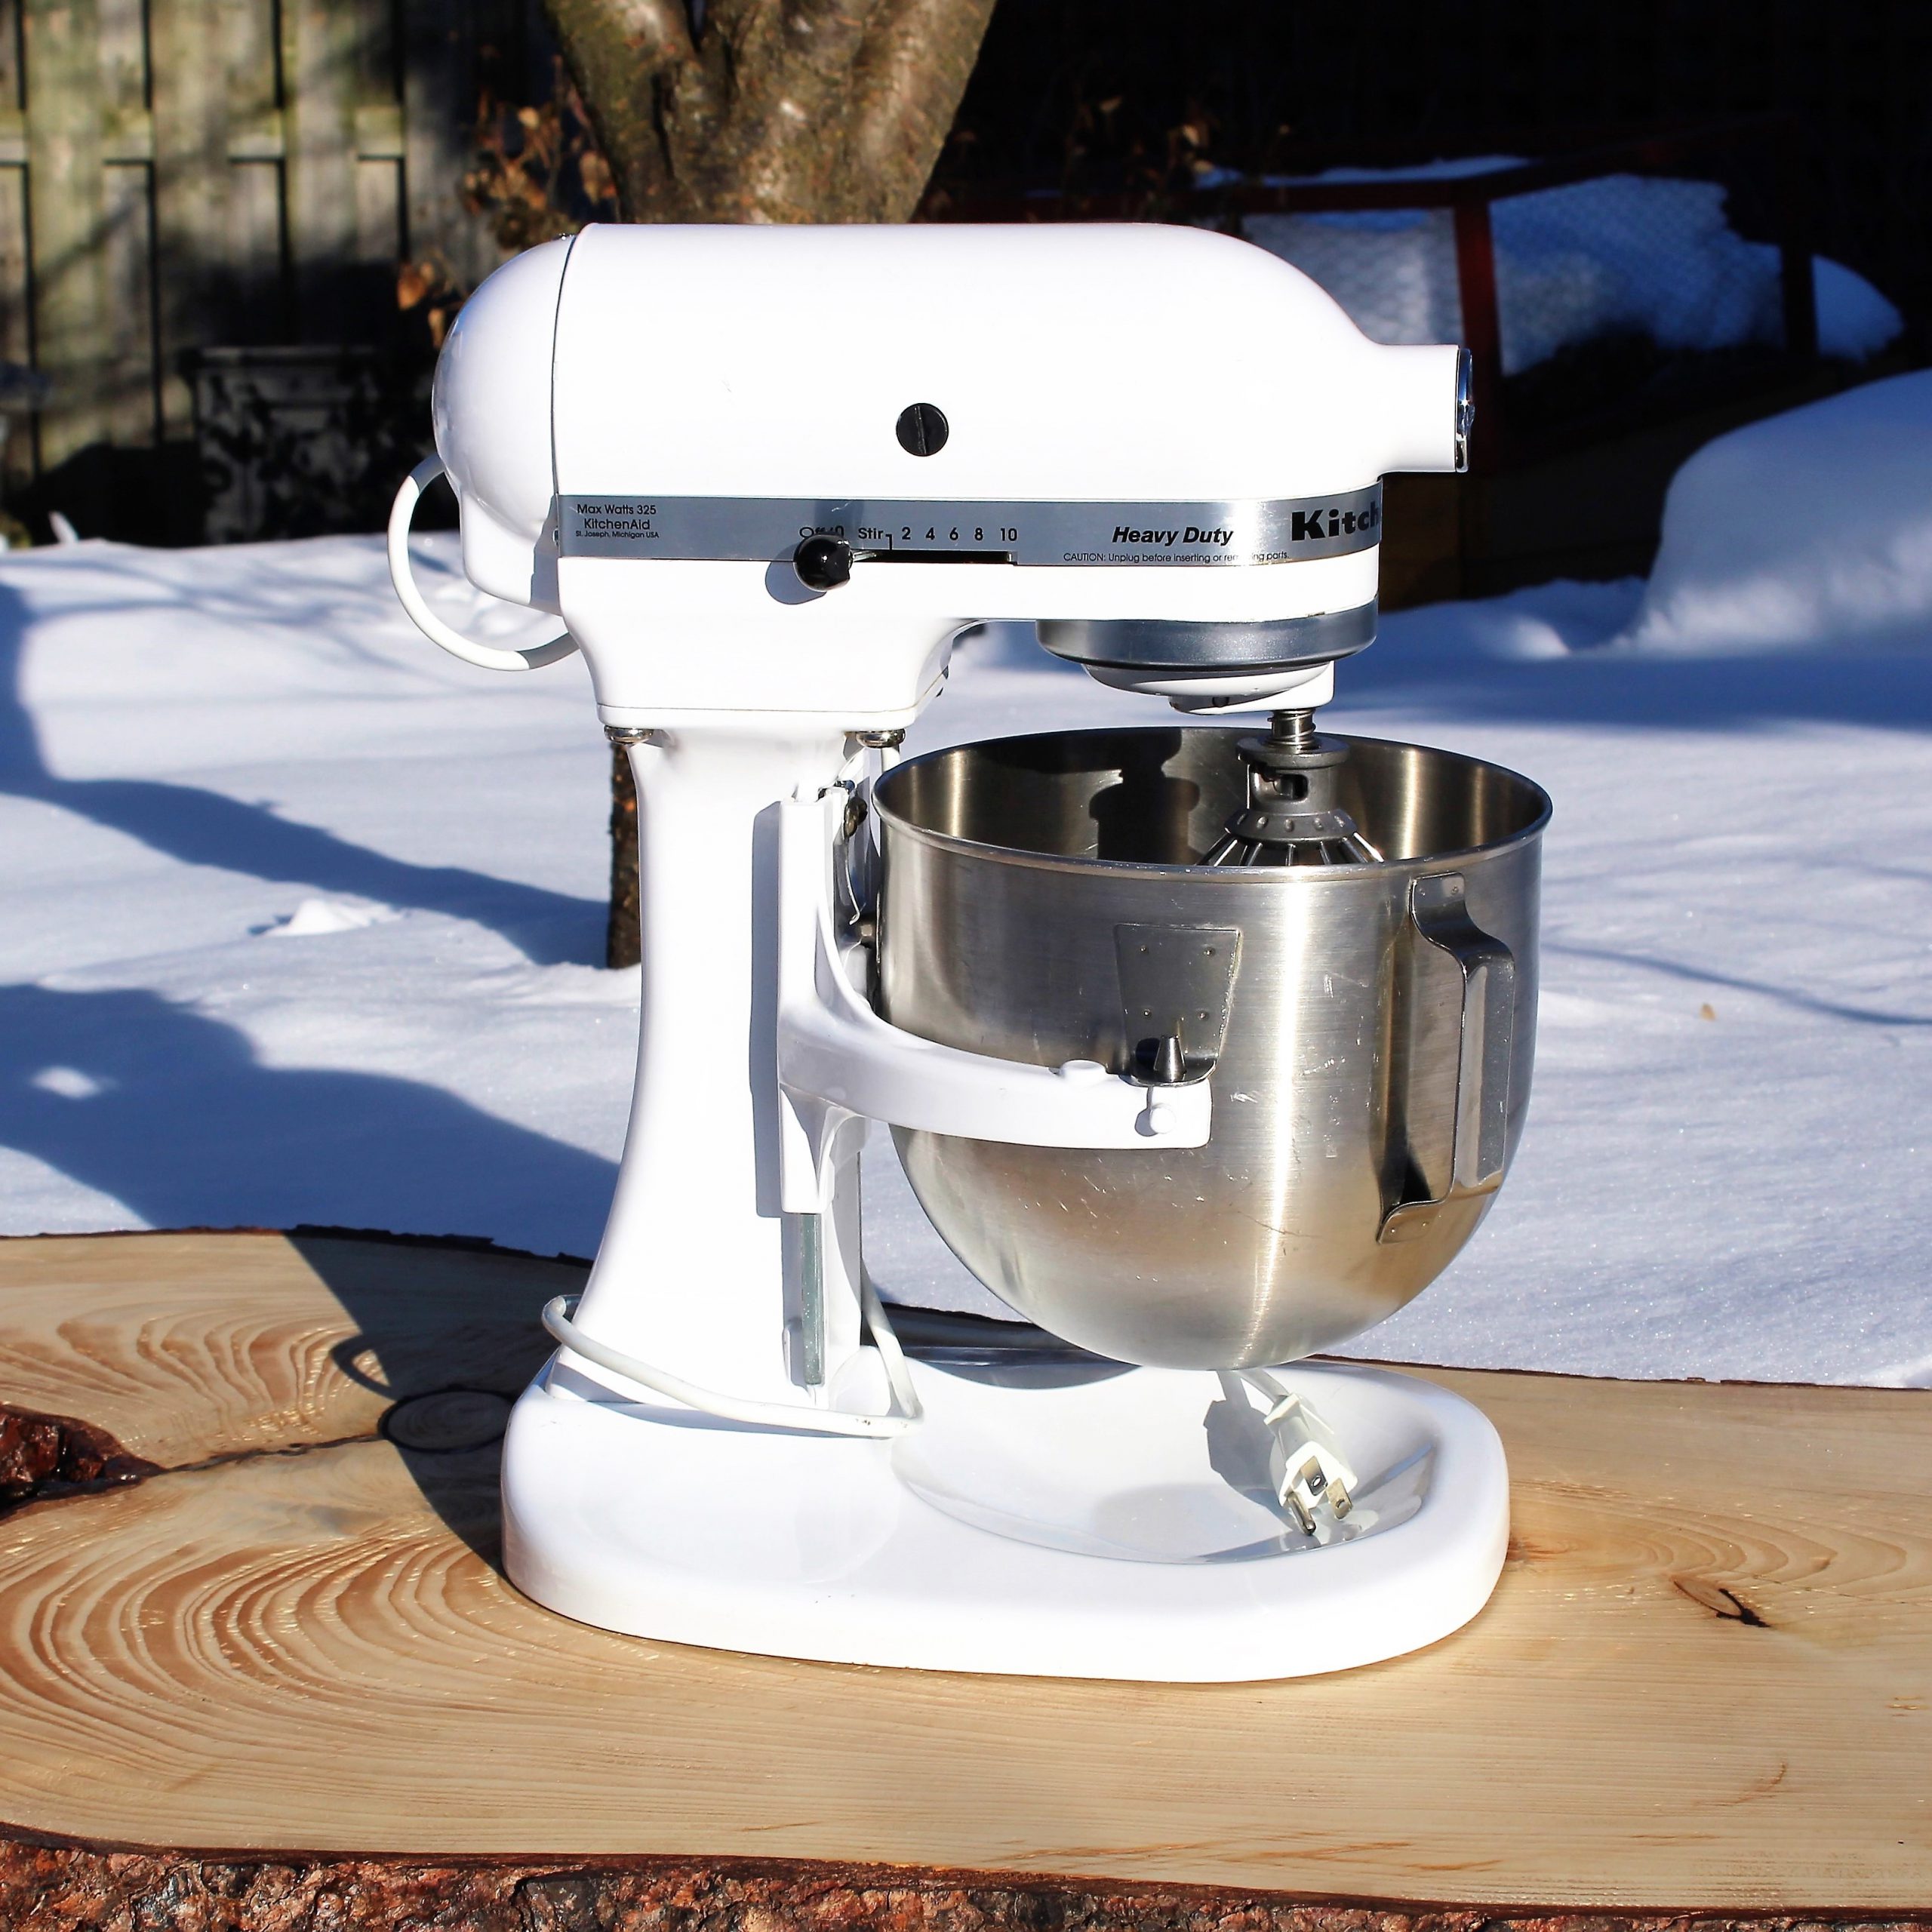 https://cansanity.com/wp-content/uploads/Heavy-Duty-KitchenAid-Stand-Mixer-2-2-scaled.jpg